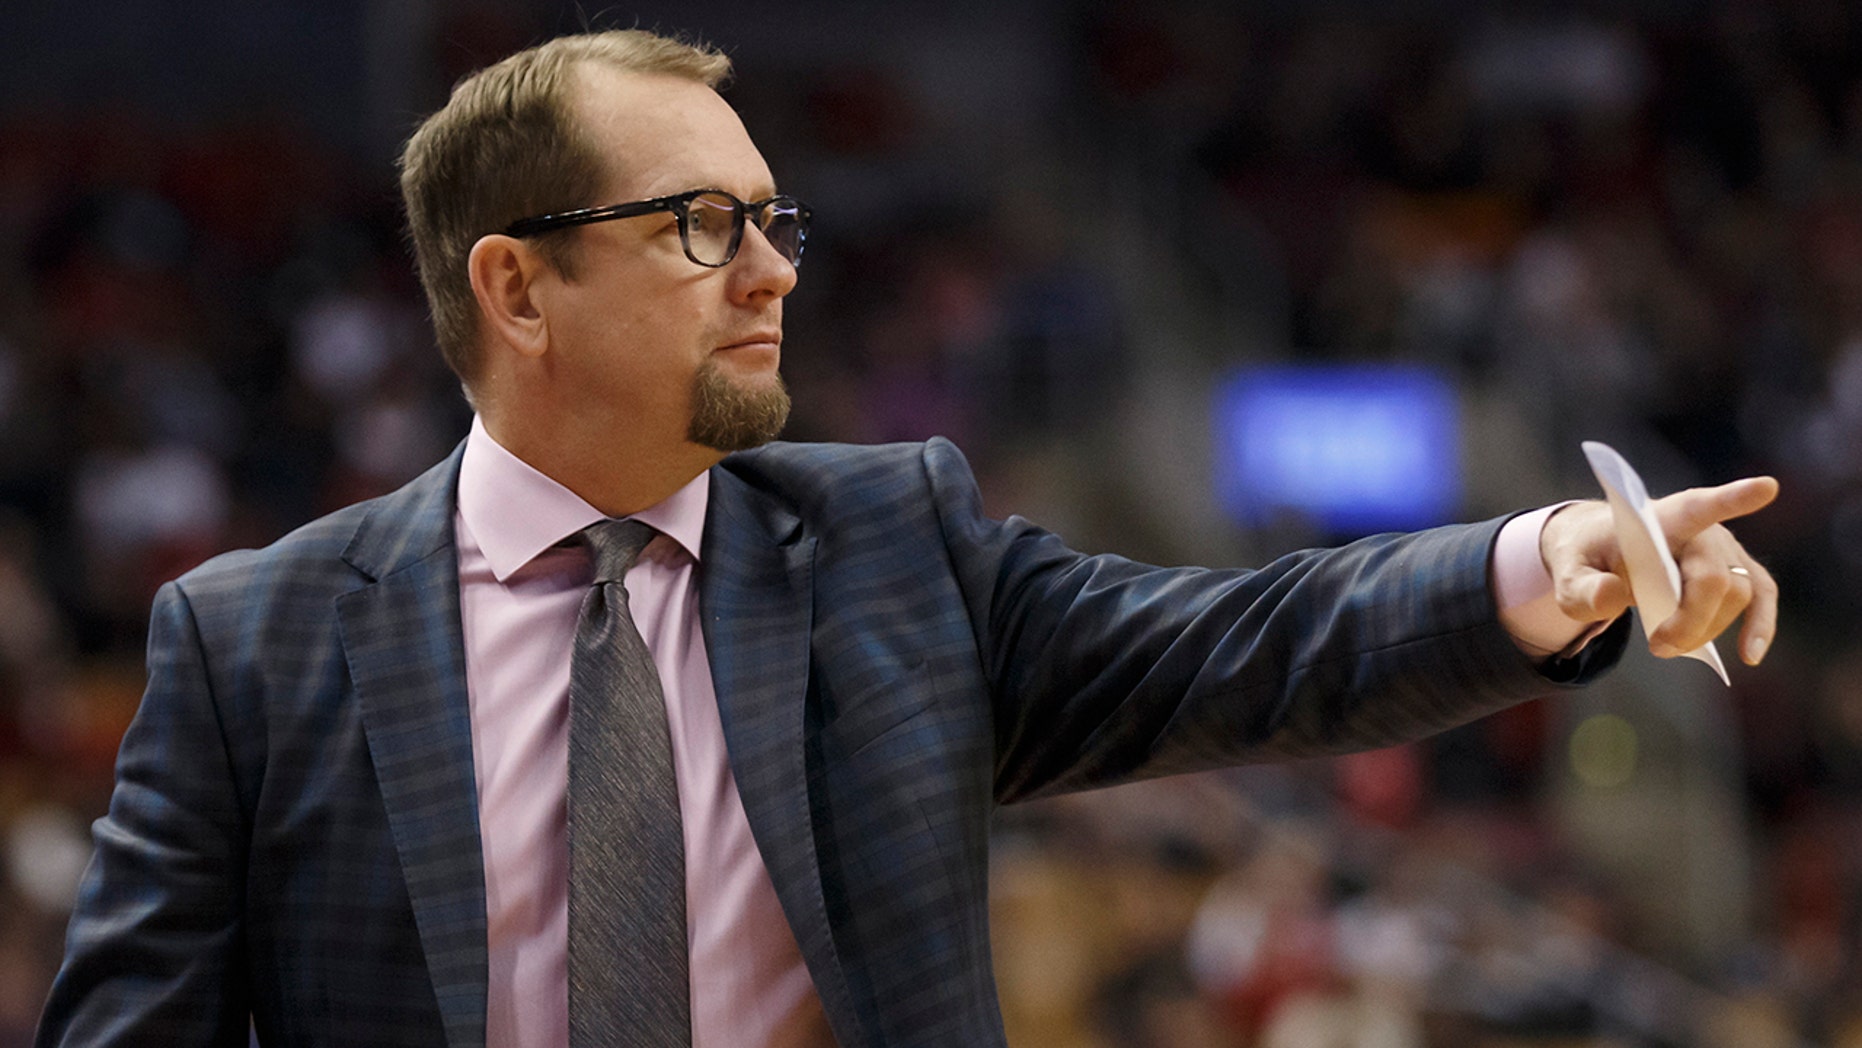 Toronto Raptors head coach Nick Nurse points during the first half of a preseason NBA basketball game against the Chicago Bulls in Toronto, Sunday, Oct. 13, 2019. (Cole Burston/The Canadian Press via AP)